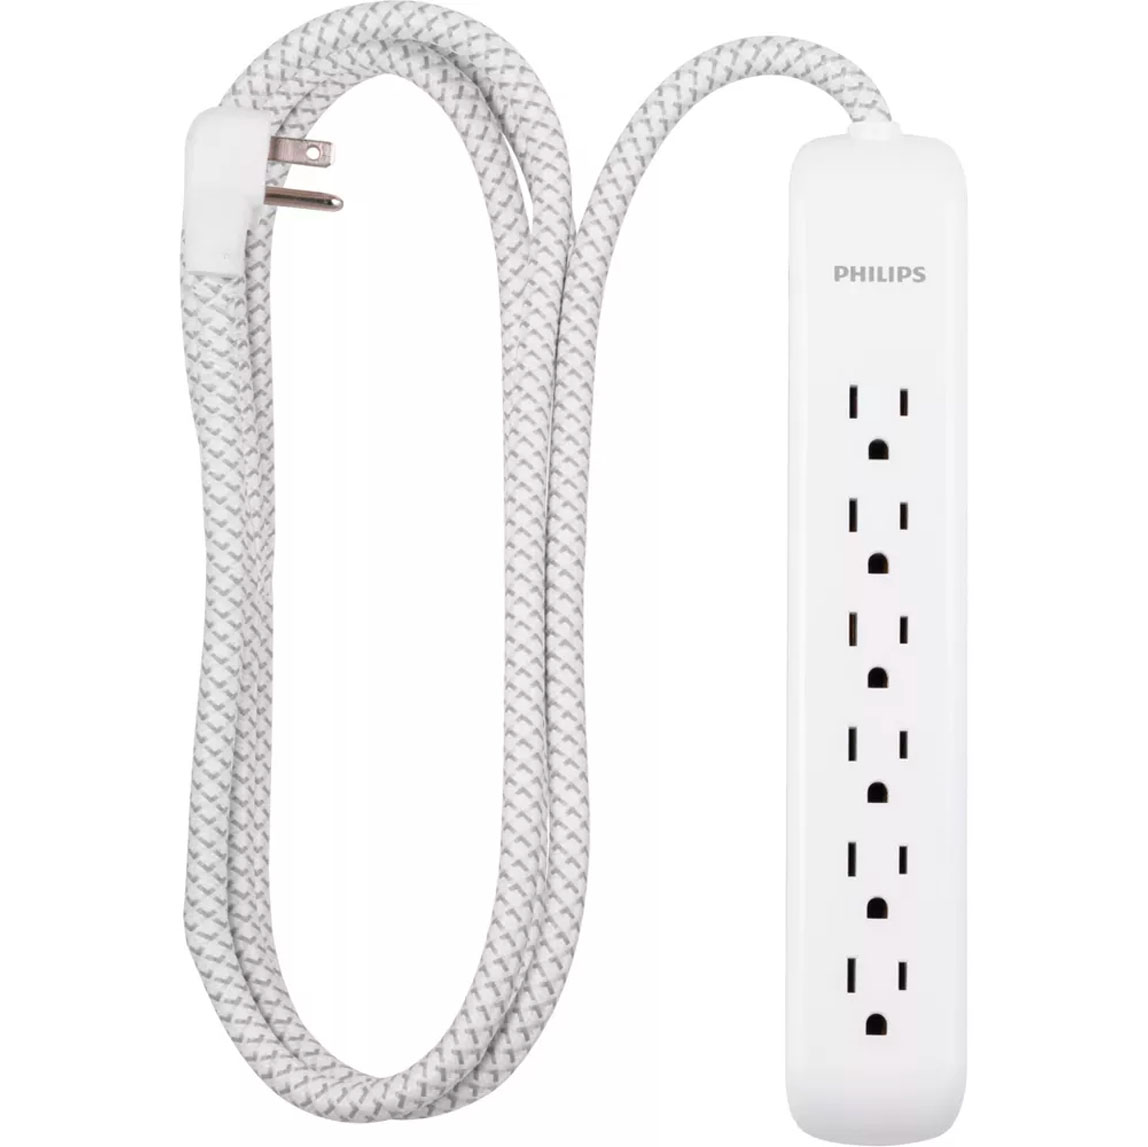 philips surge protector